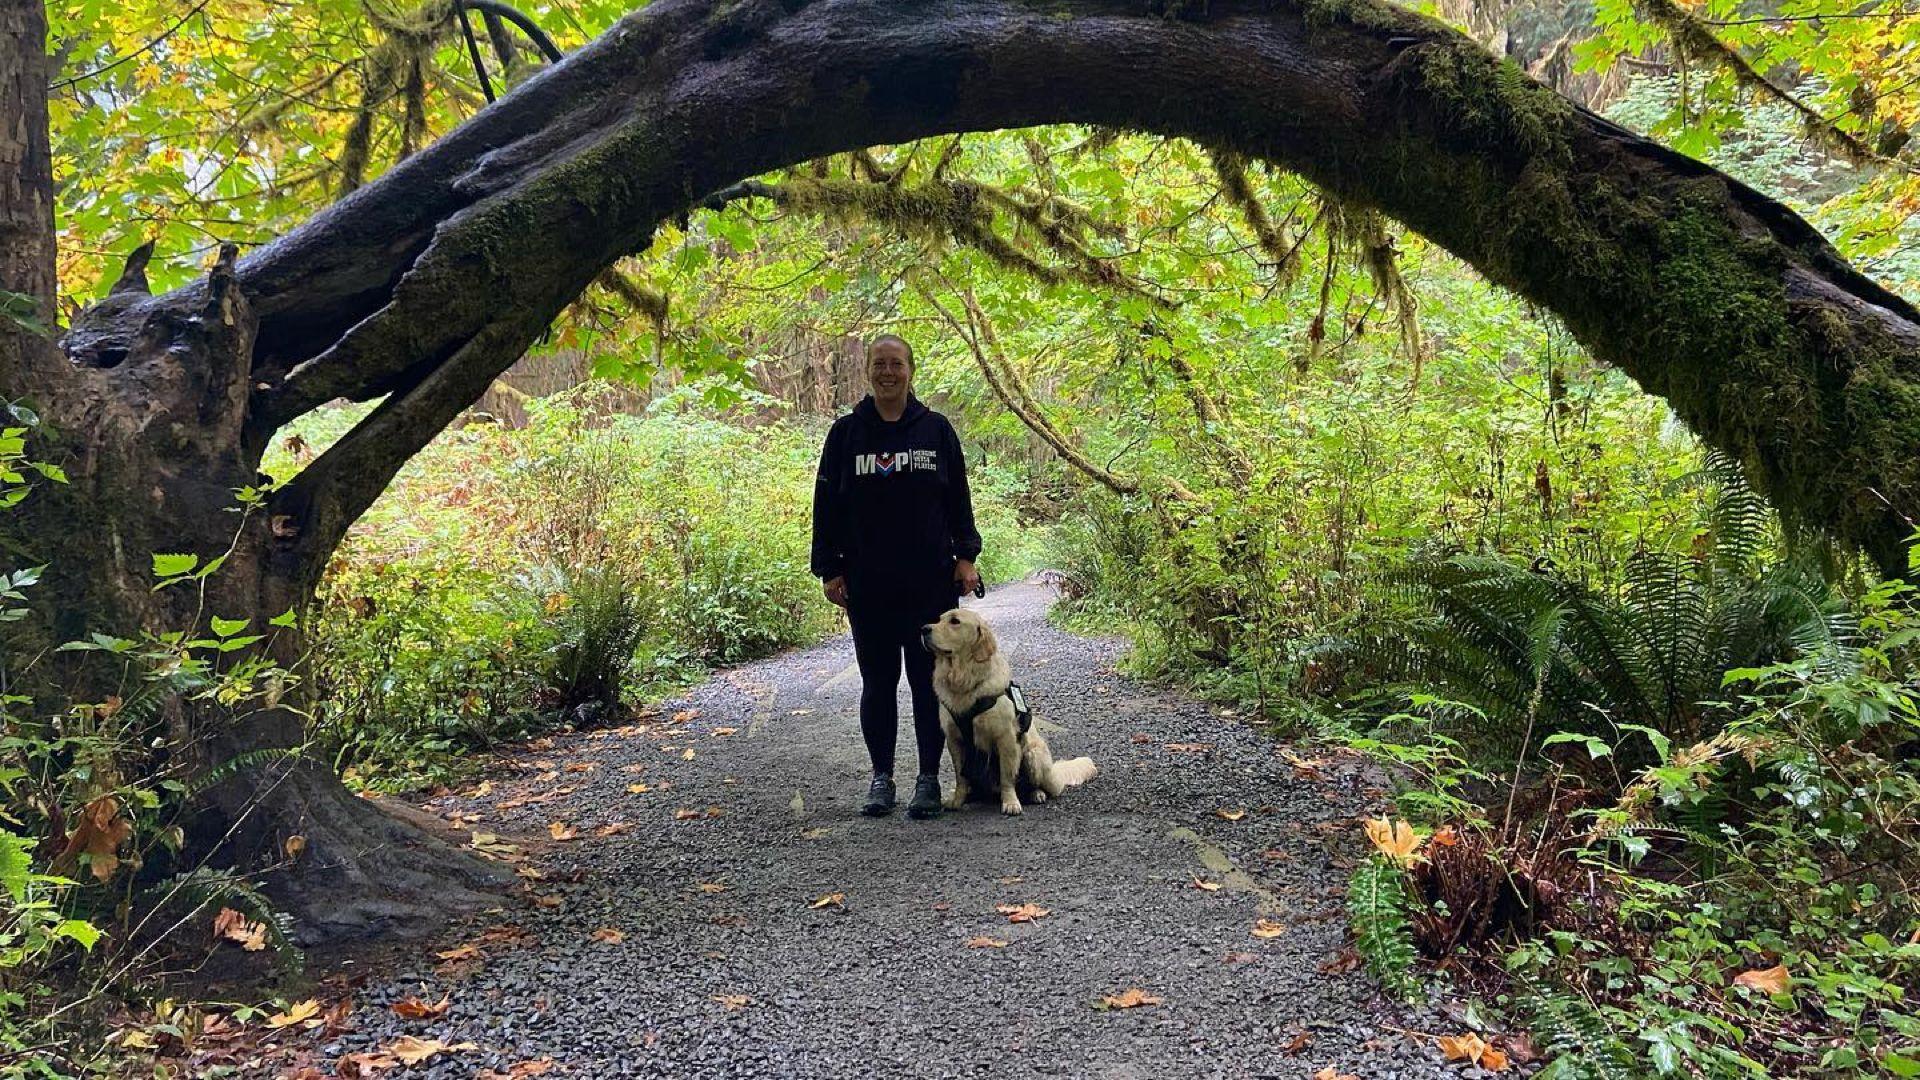 Angela and her service dog Raider stand under the arch of a fallen tree in the woods